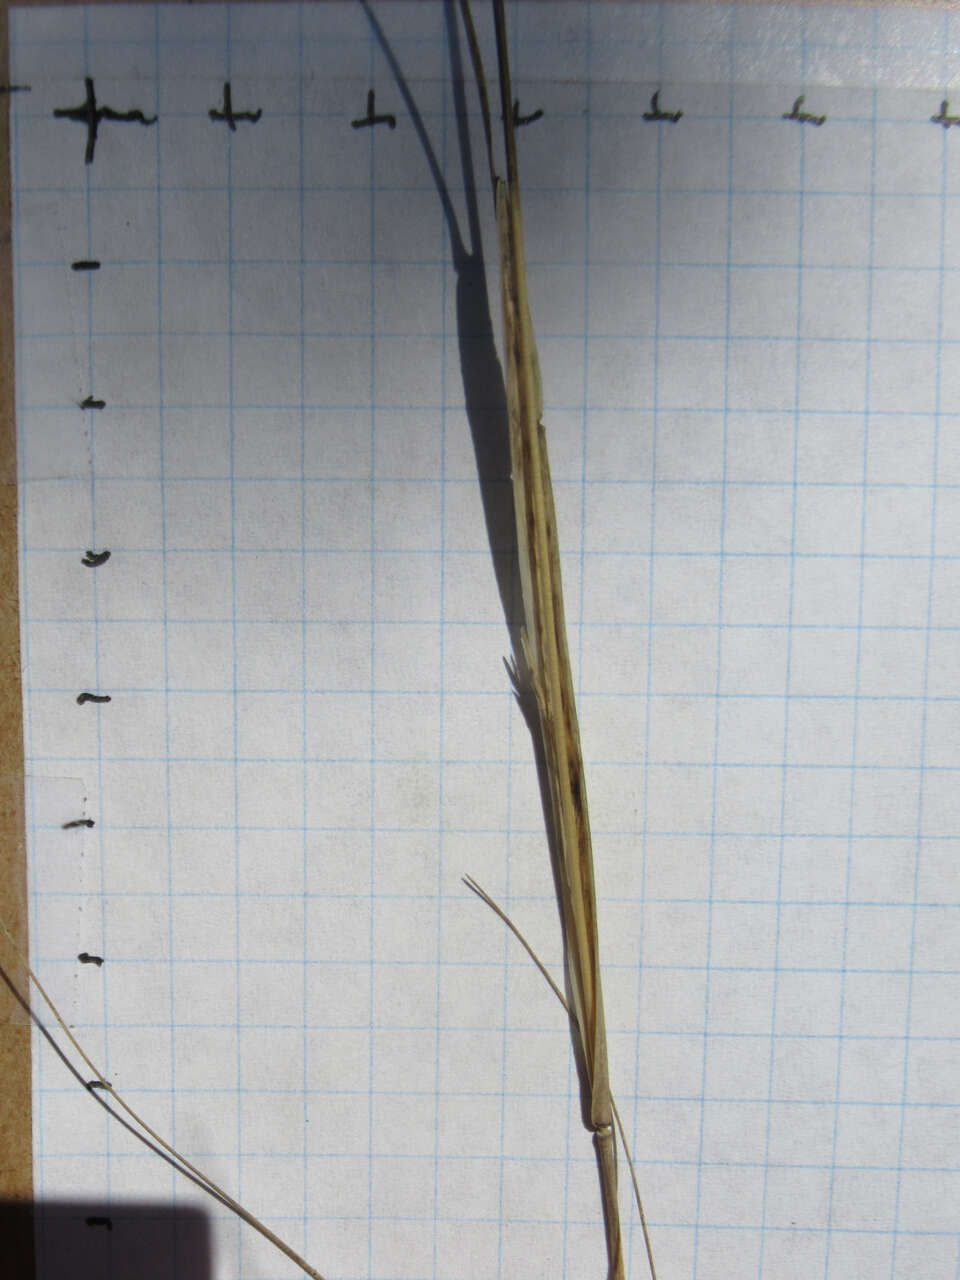 Image of composite dropseed